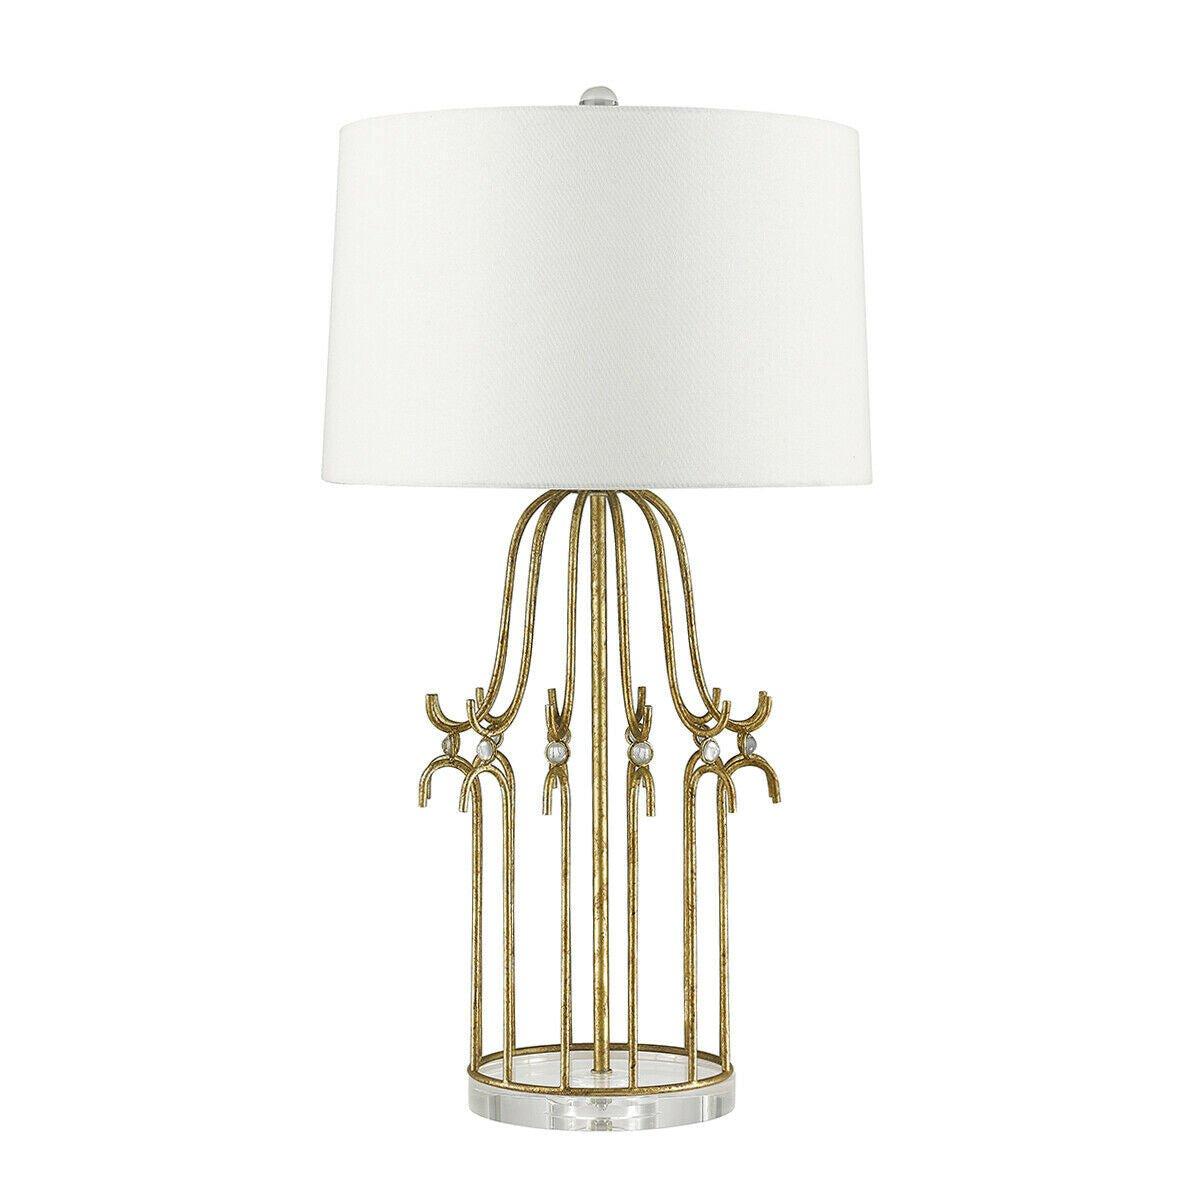 Table Lamp Steel Frame Crystal Accents Cream Shade Distressed Gold LED E27 100W